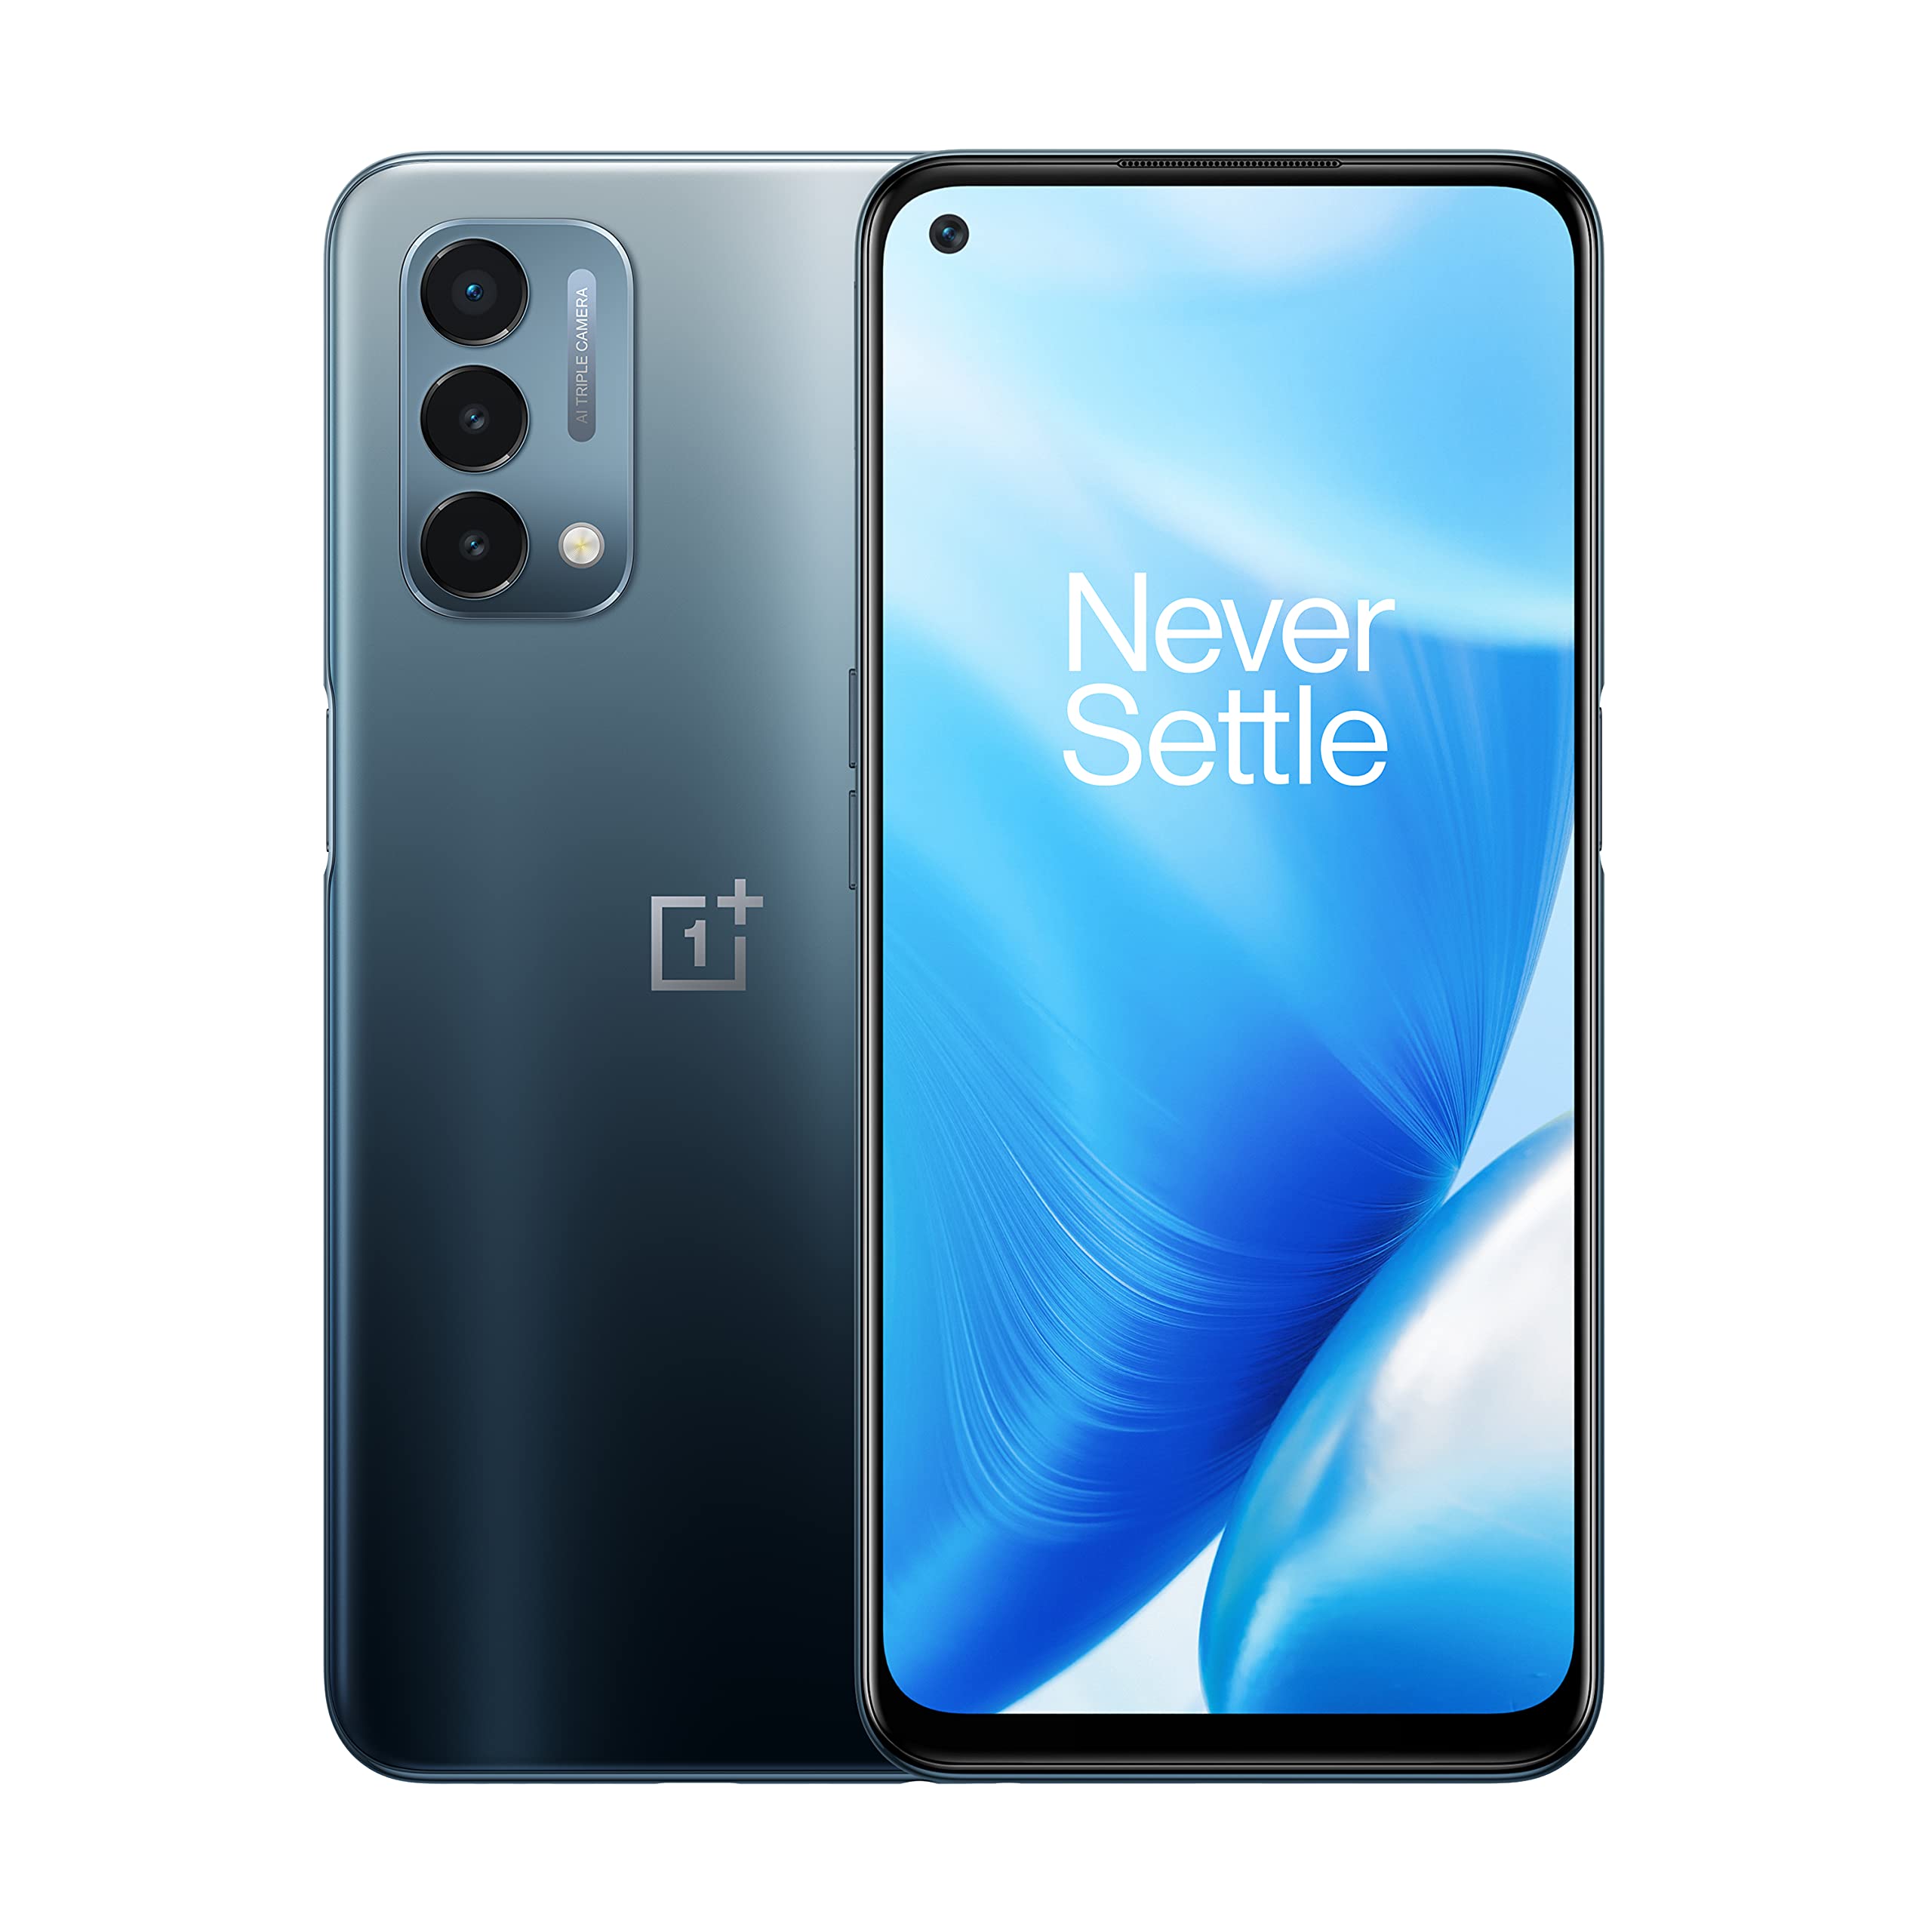 OnePlus Nord N200 | Large 5000mAh Battery | 5G Unlocked Android Smartphone U.S Version | 64GB Storage | 6.49